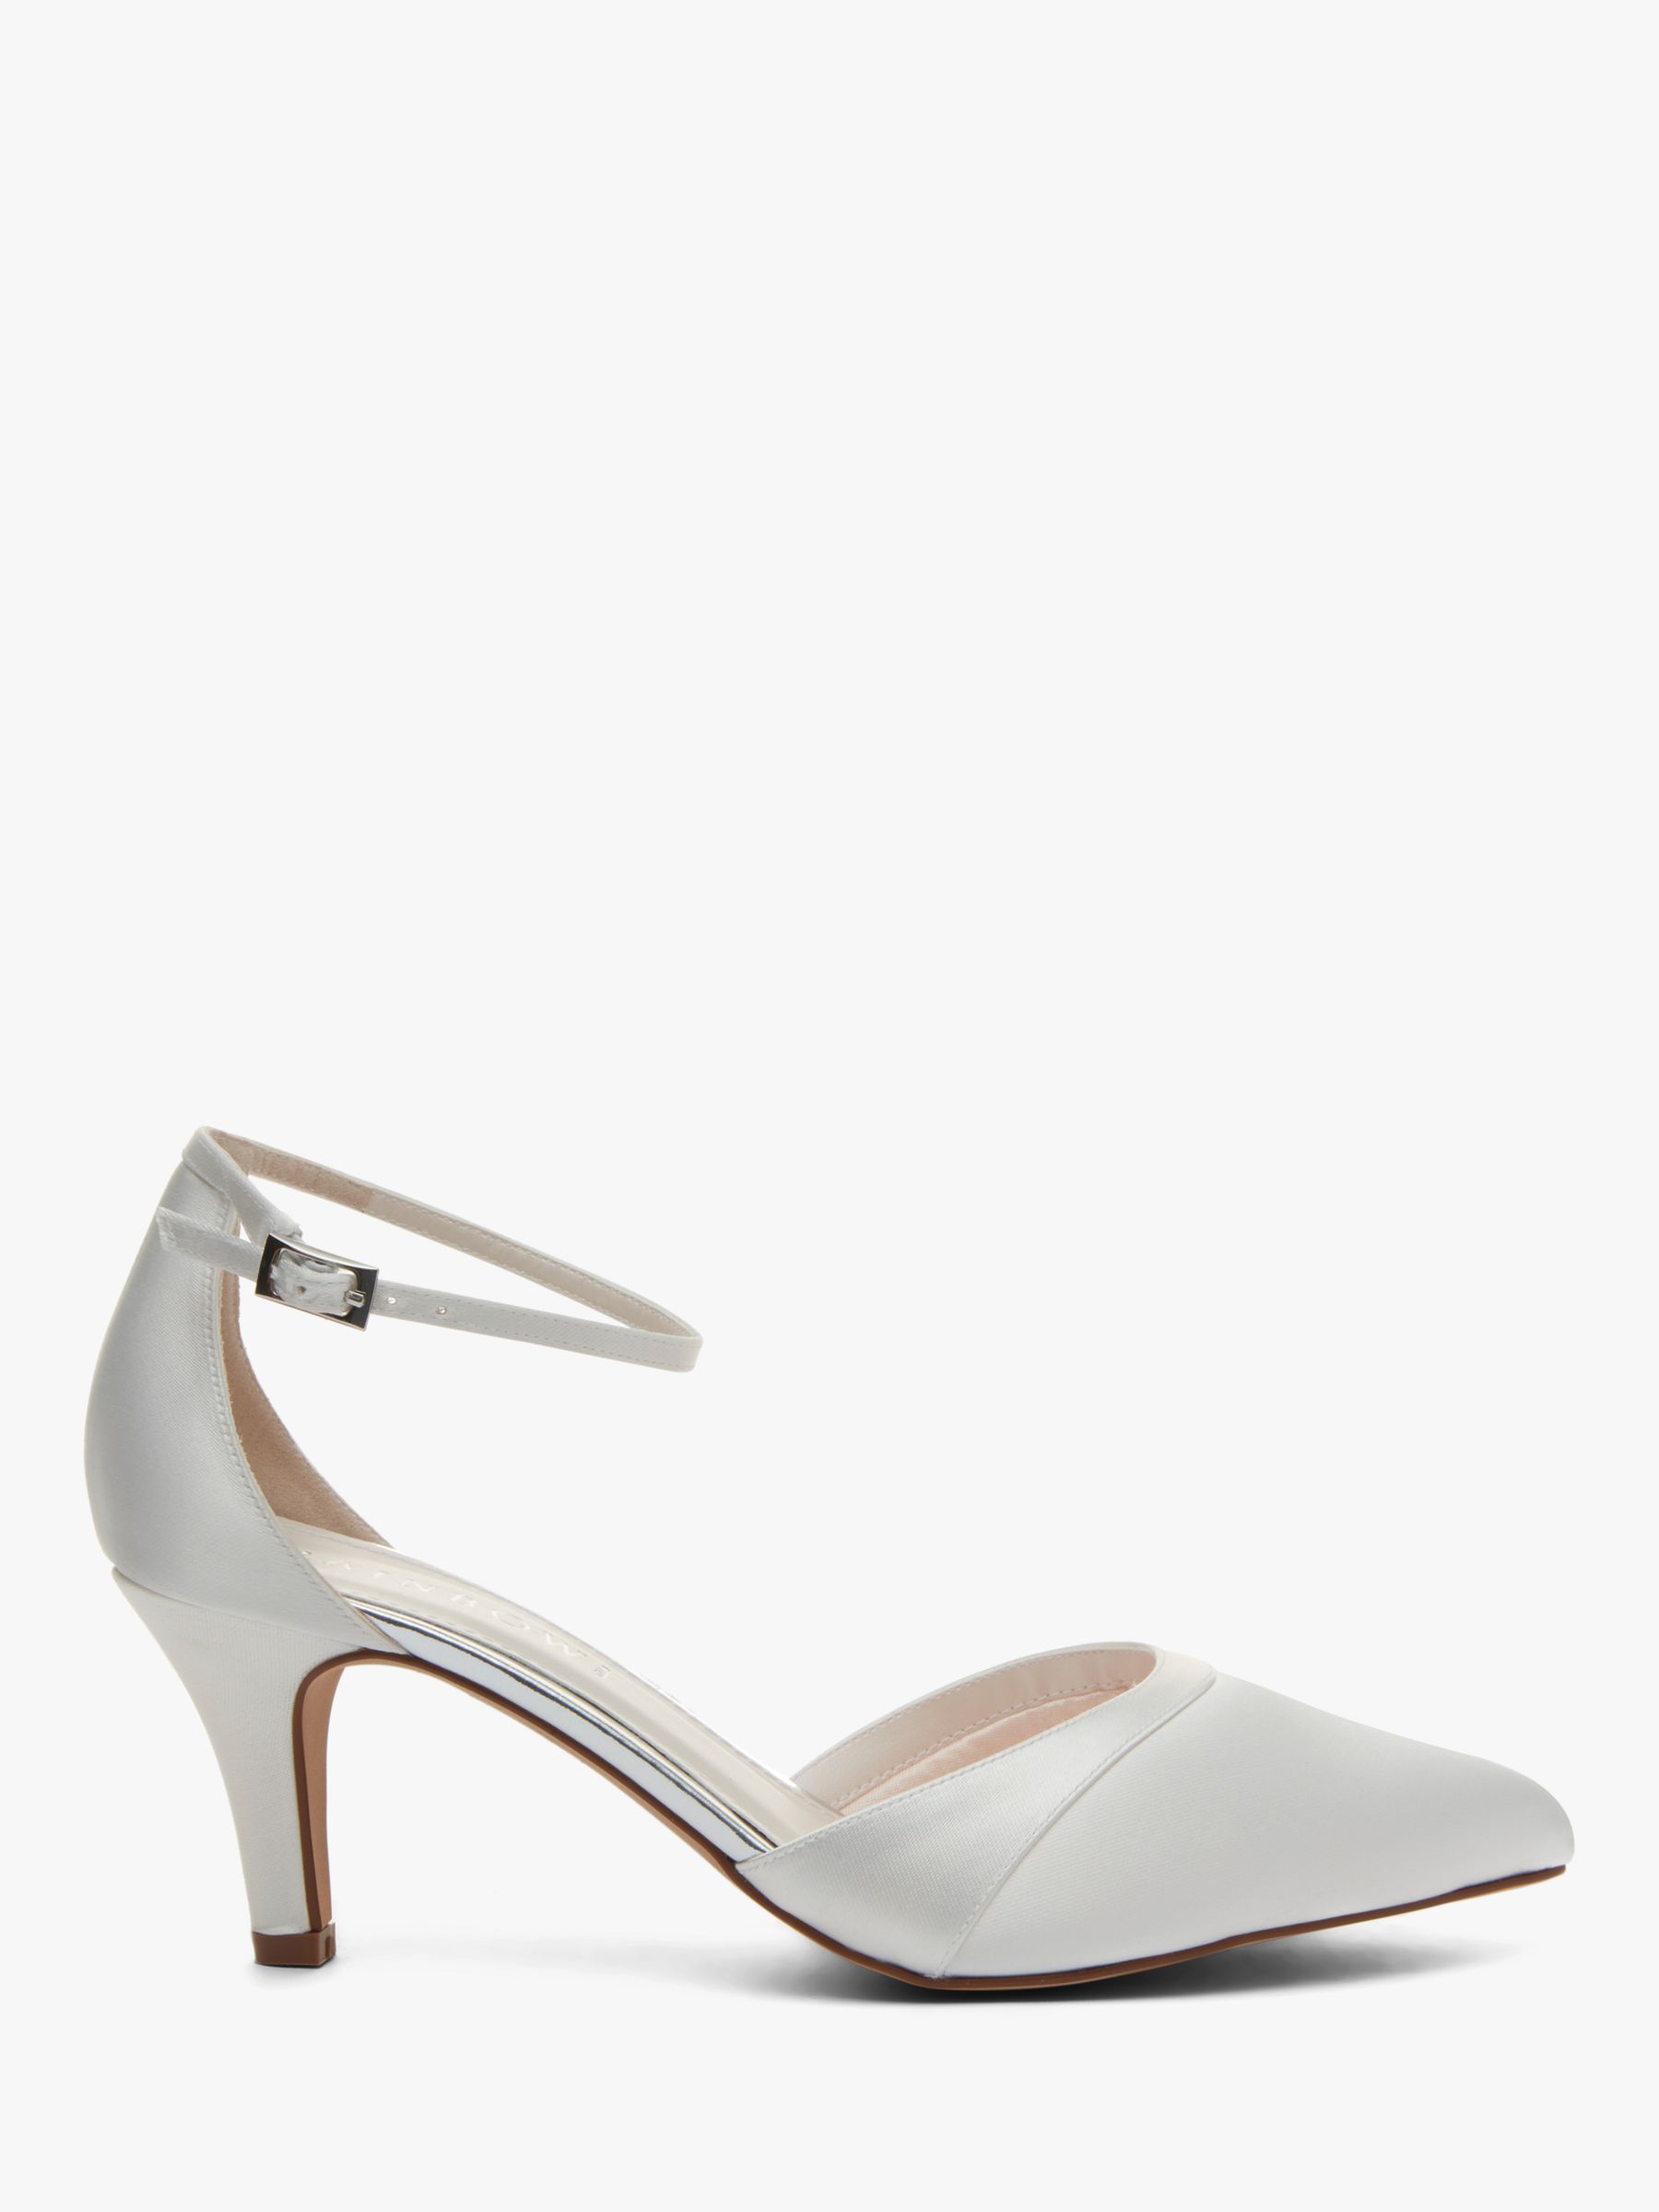 pointed court shoes